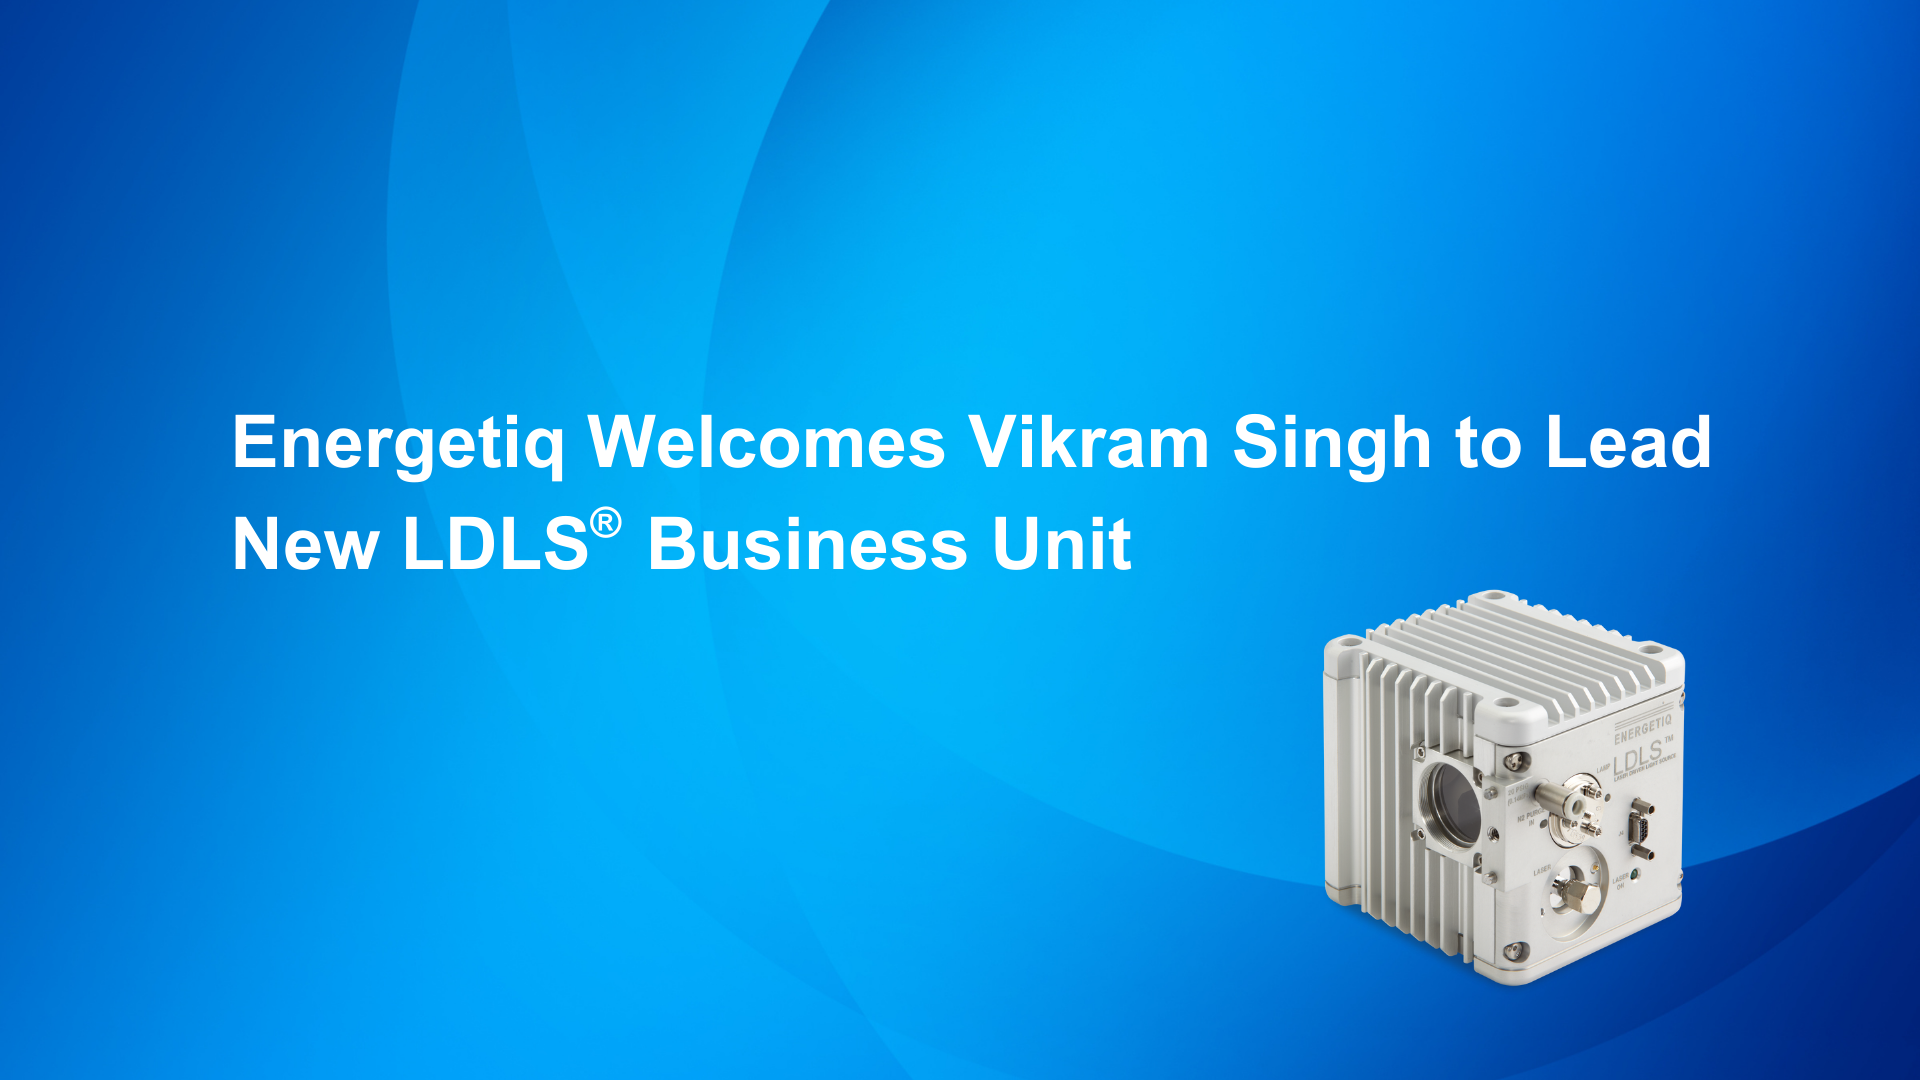 Energetiq Welcomes Vikram Singh to Lead New LDLS® Business Unit